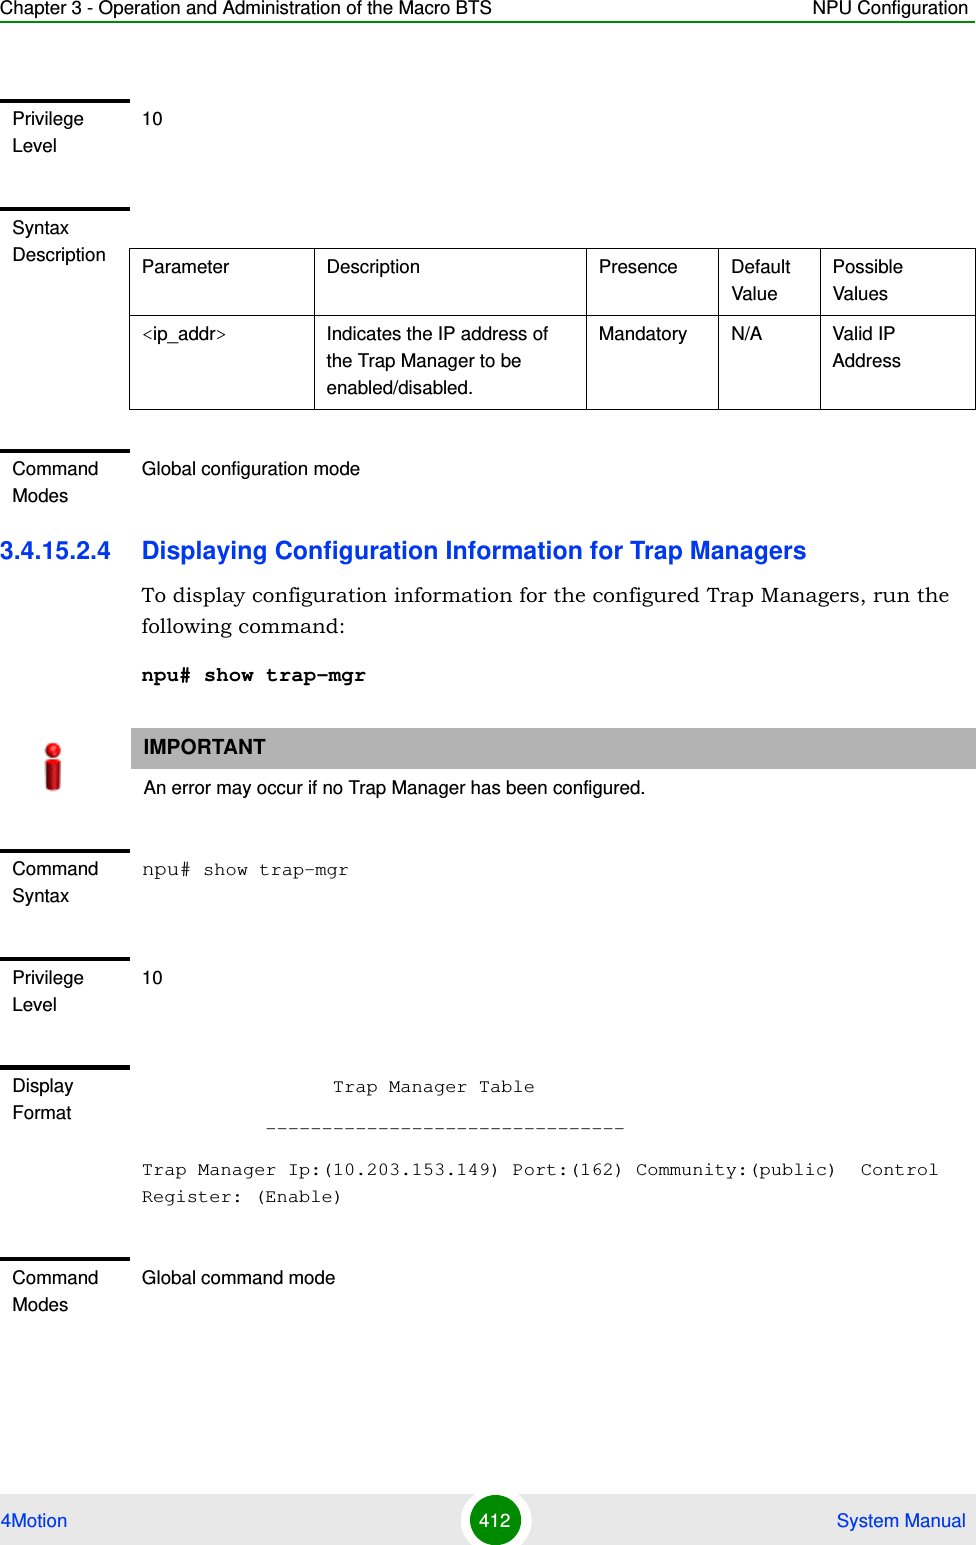 Chapter 3 - Operation and Administration of the Macro BTS NPU Configuration4Motion 412  System Manual3.4.15.2.4 Displaying Configuration Information for Trap ManagersTo display configuration information for the configured Trap Managers, run the following command:npu# show trap-mgrPrivilege Level10Syntax Description Parameter Description Presence Default ValuePossible Values&lt;ip_addr&gt;  Indicates the IP address of the Trap Manager to be enabled/disabled.Mandatory N/A Valid IP AddressCommand ModesGlobal configuration modeIMPORTANTAn error may occur if no Trap Manager has been configured.Command Syntaxnpu# show trap-mgrPrivilege Level10Display Format                 Trap Manager Table           --------------------------------Trap Manager Ip:(10.203.153.149) Port:(162) Community:(public)  Control Register: (Enable)Command ModesGlobal command mode